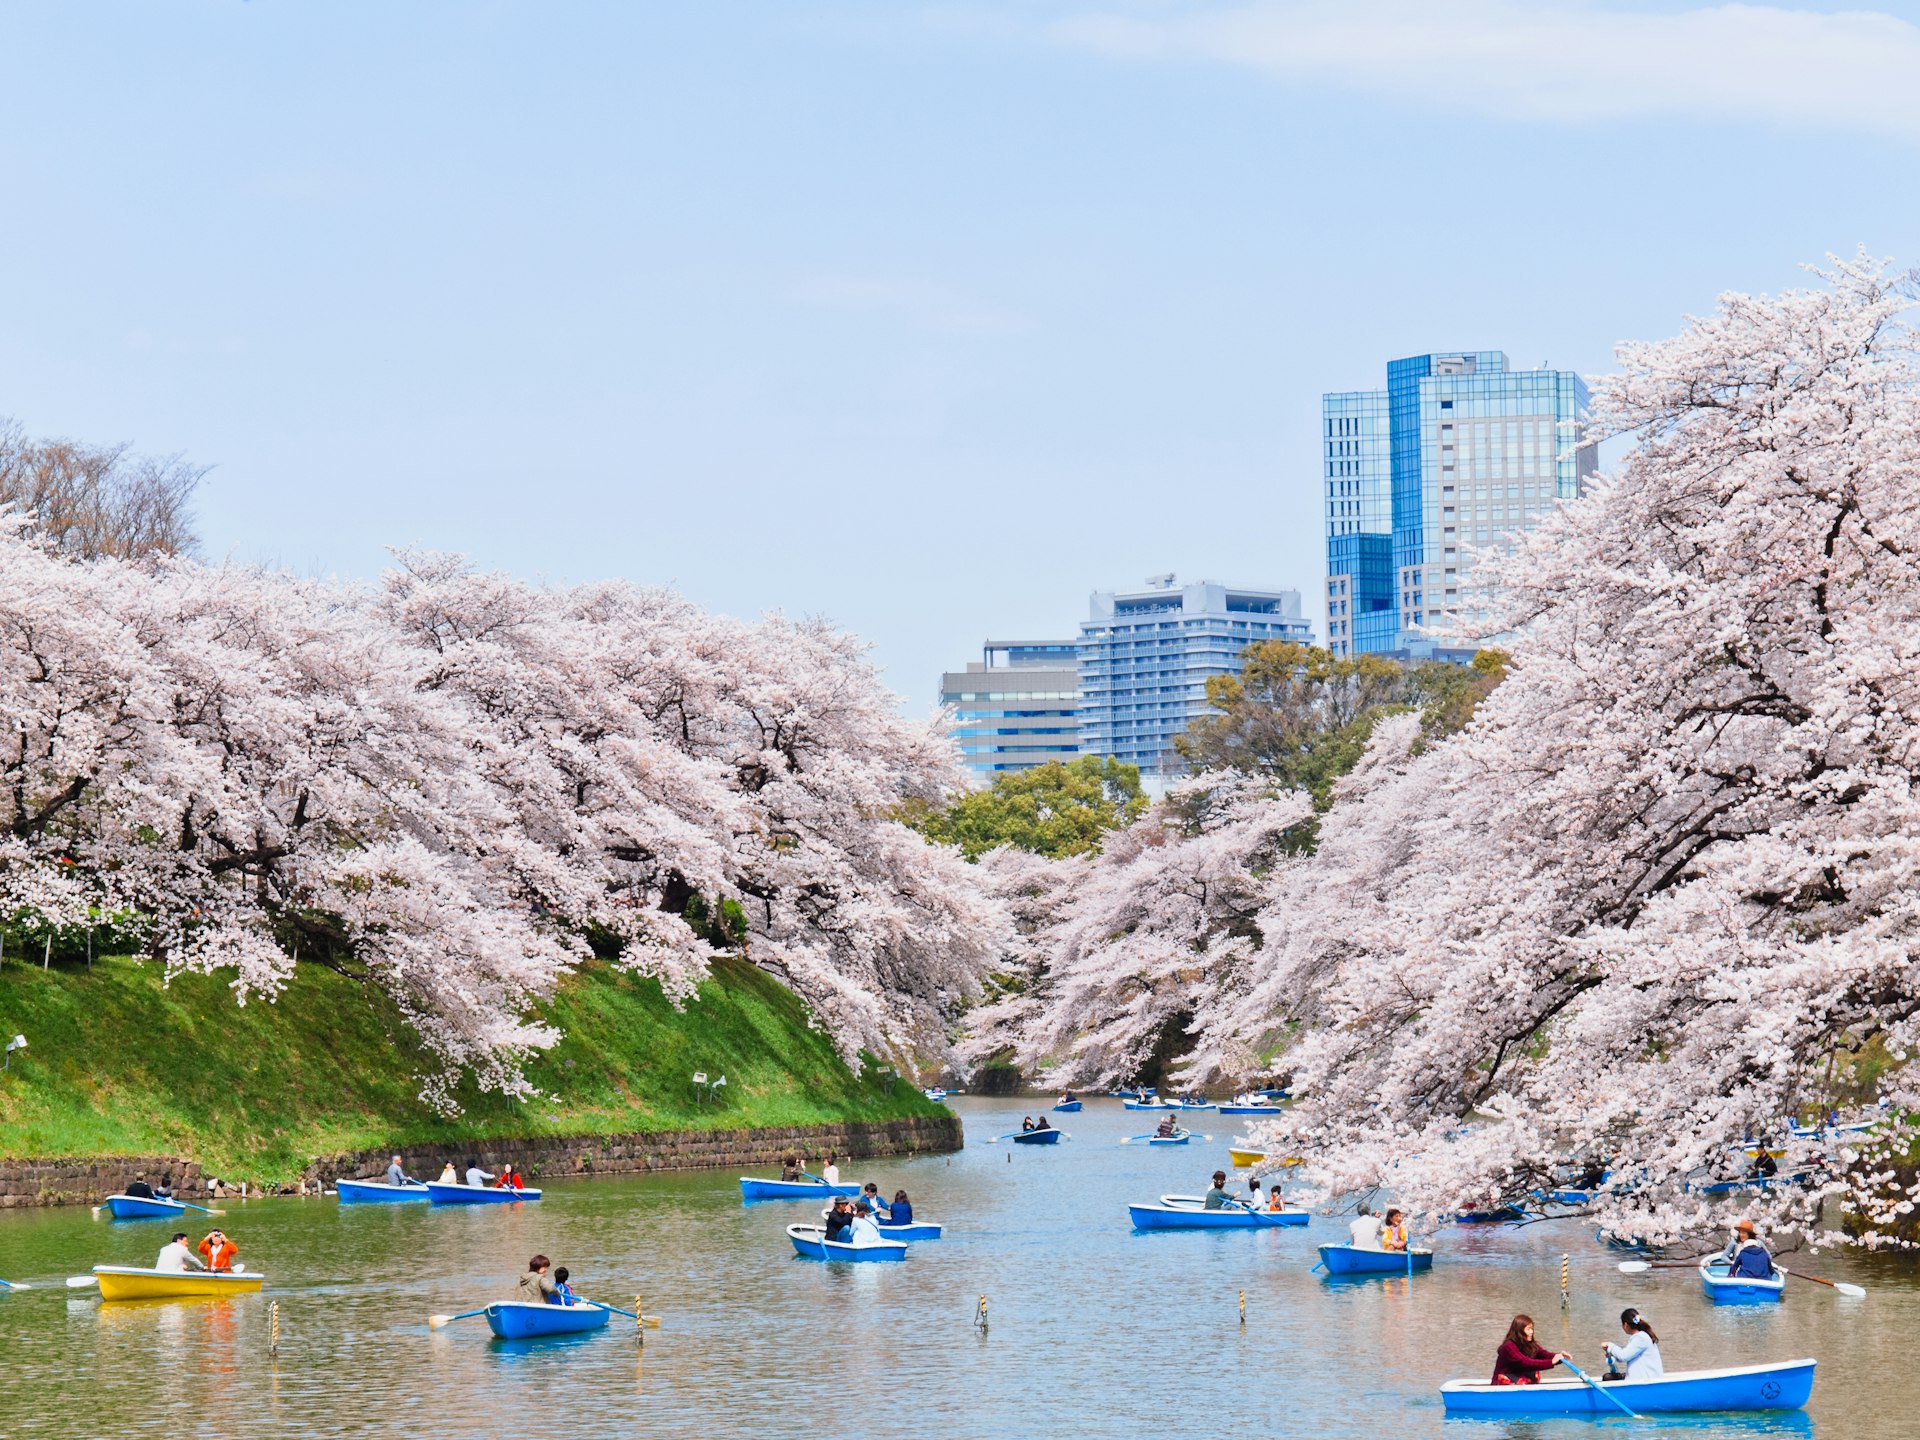 Boats going down a river lined with cherry blossom trees.